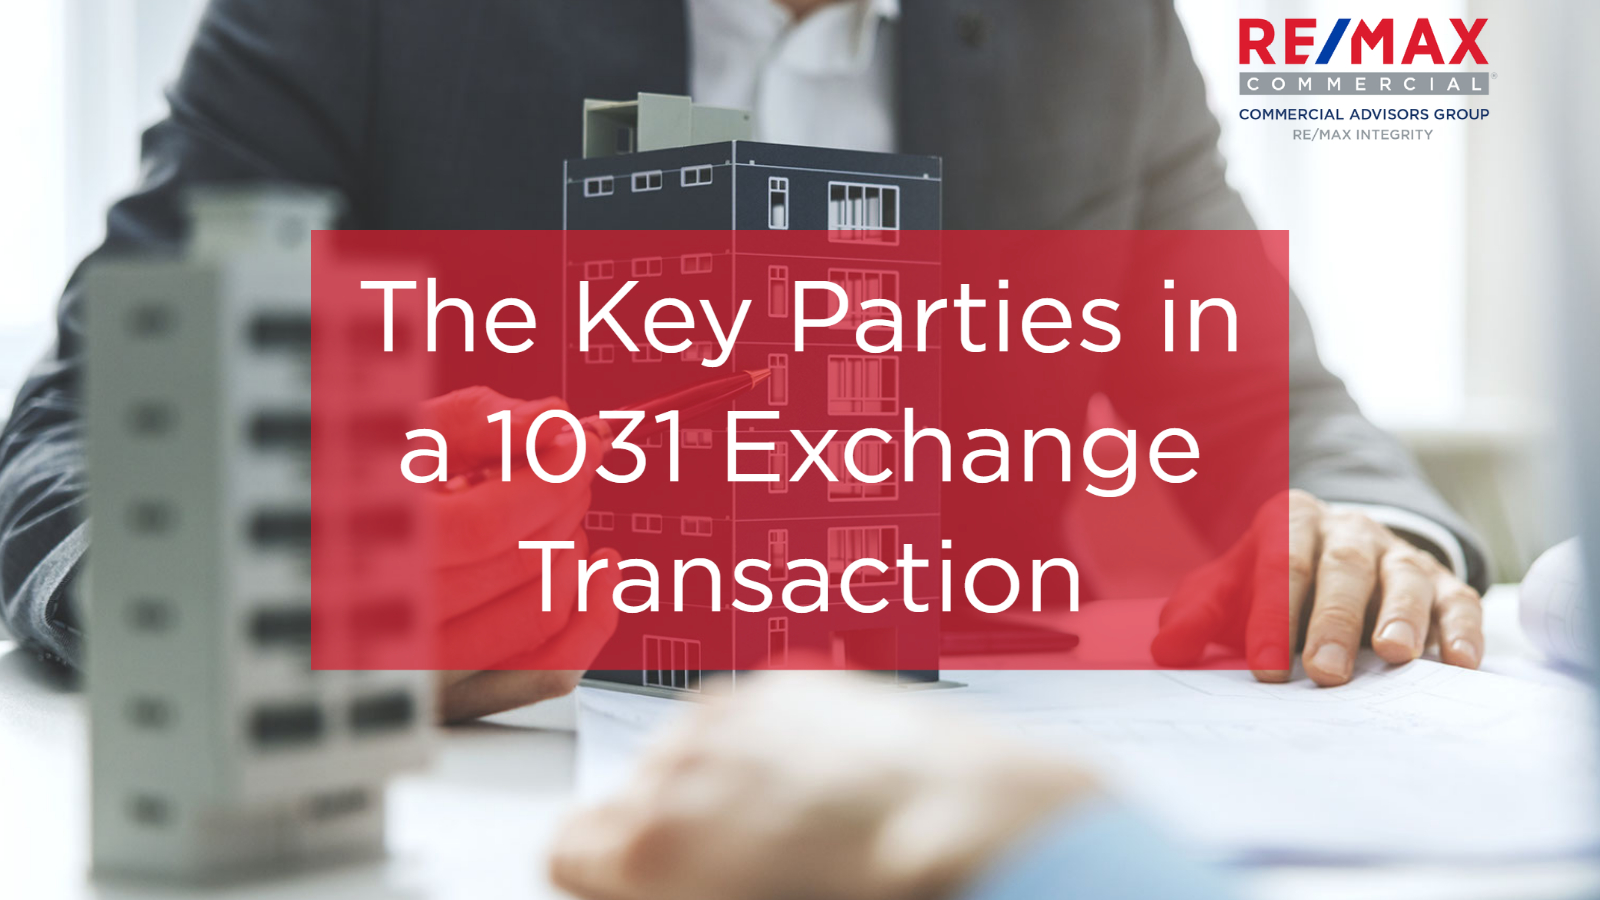 Understanding the Key Parties in a 1031 Exchange Transaction